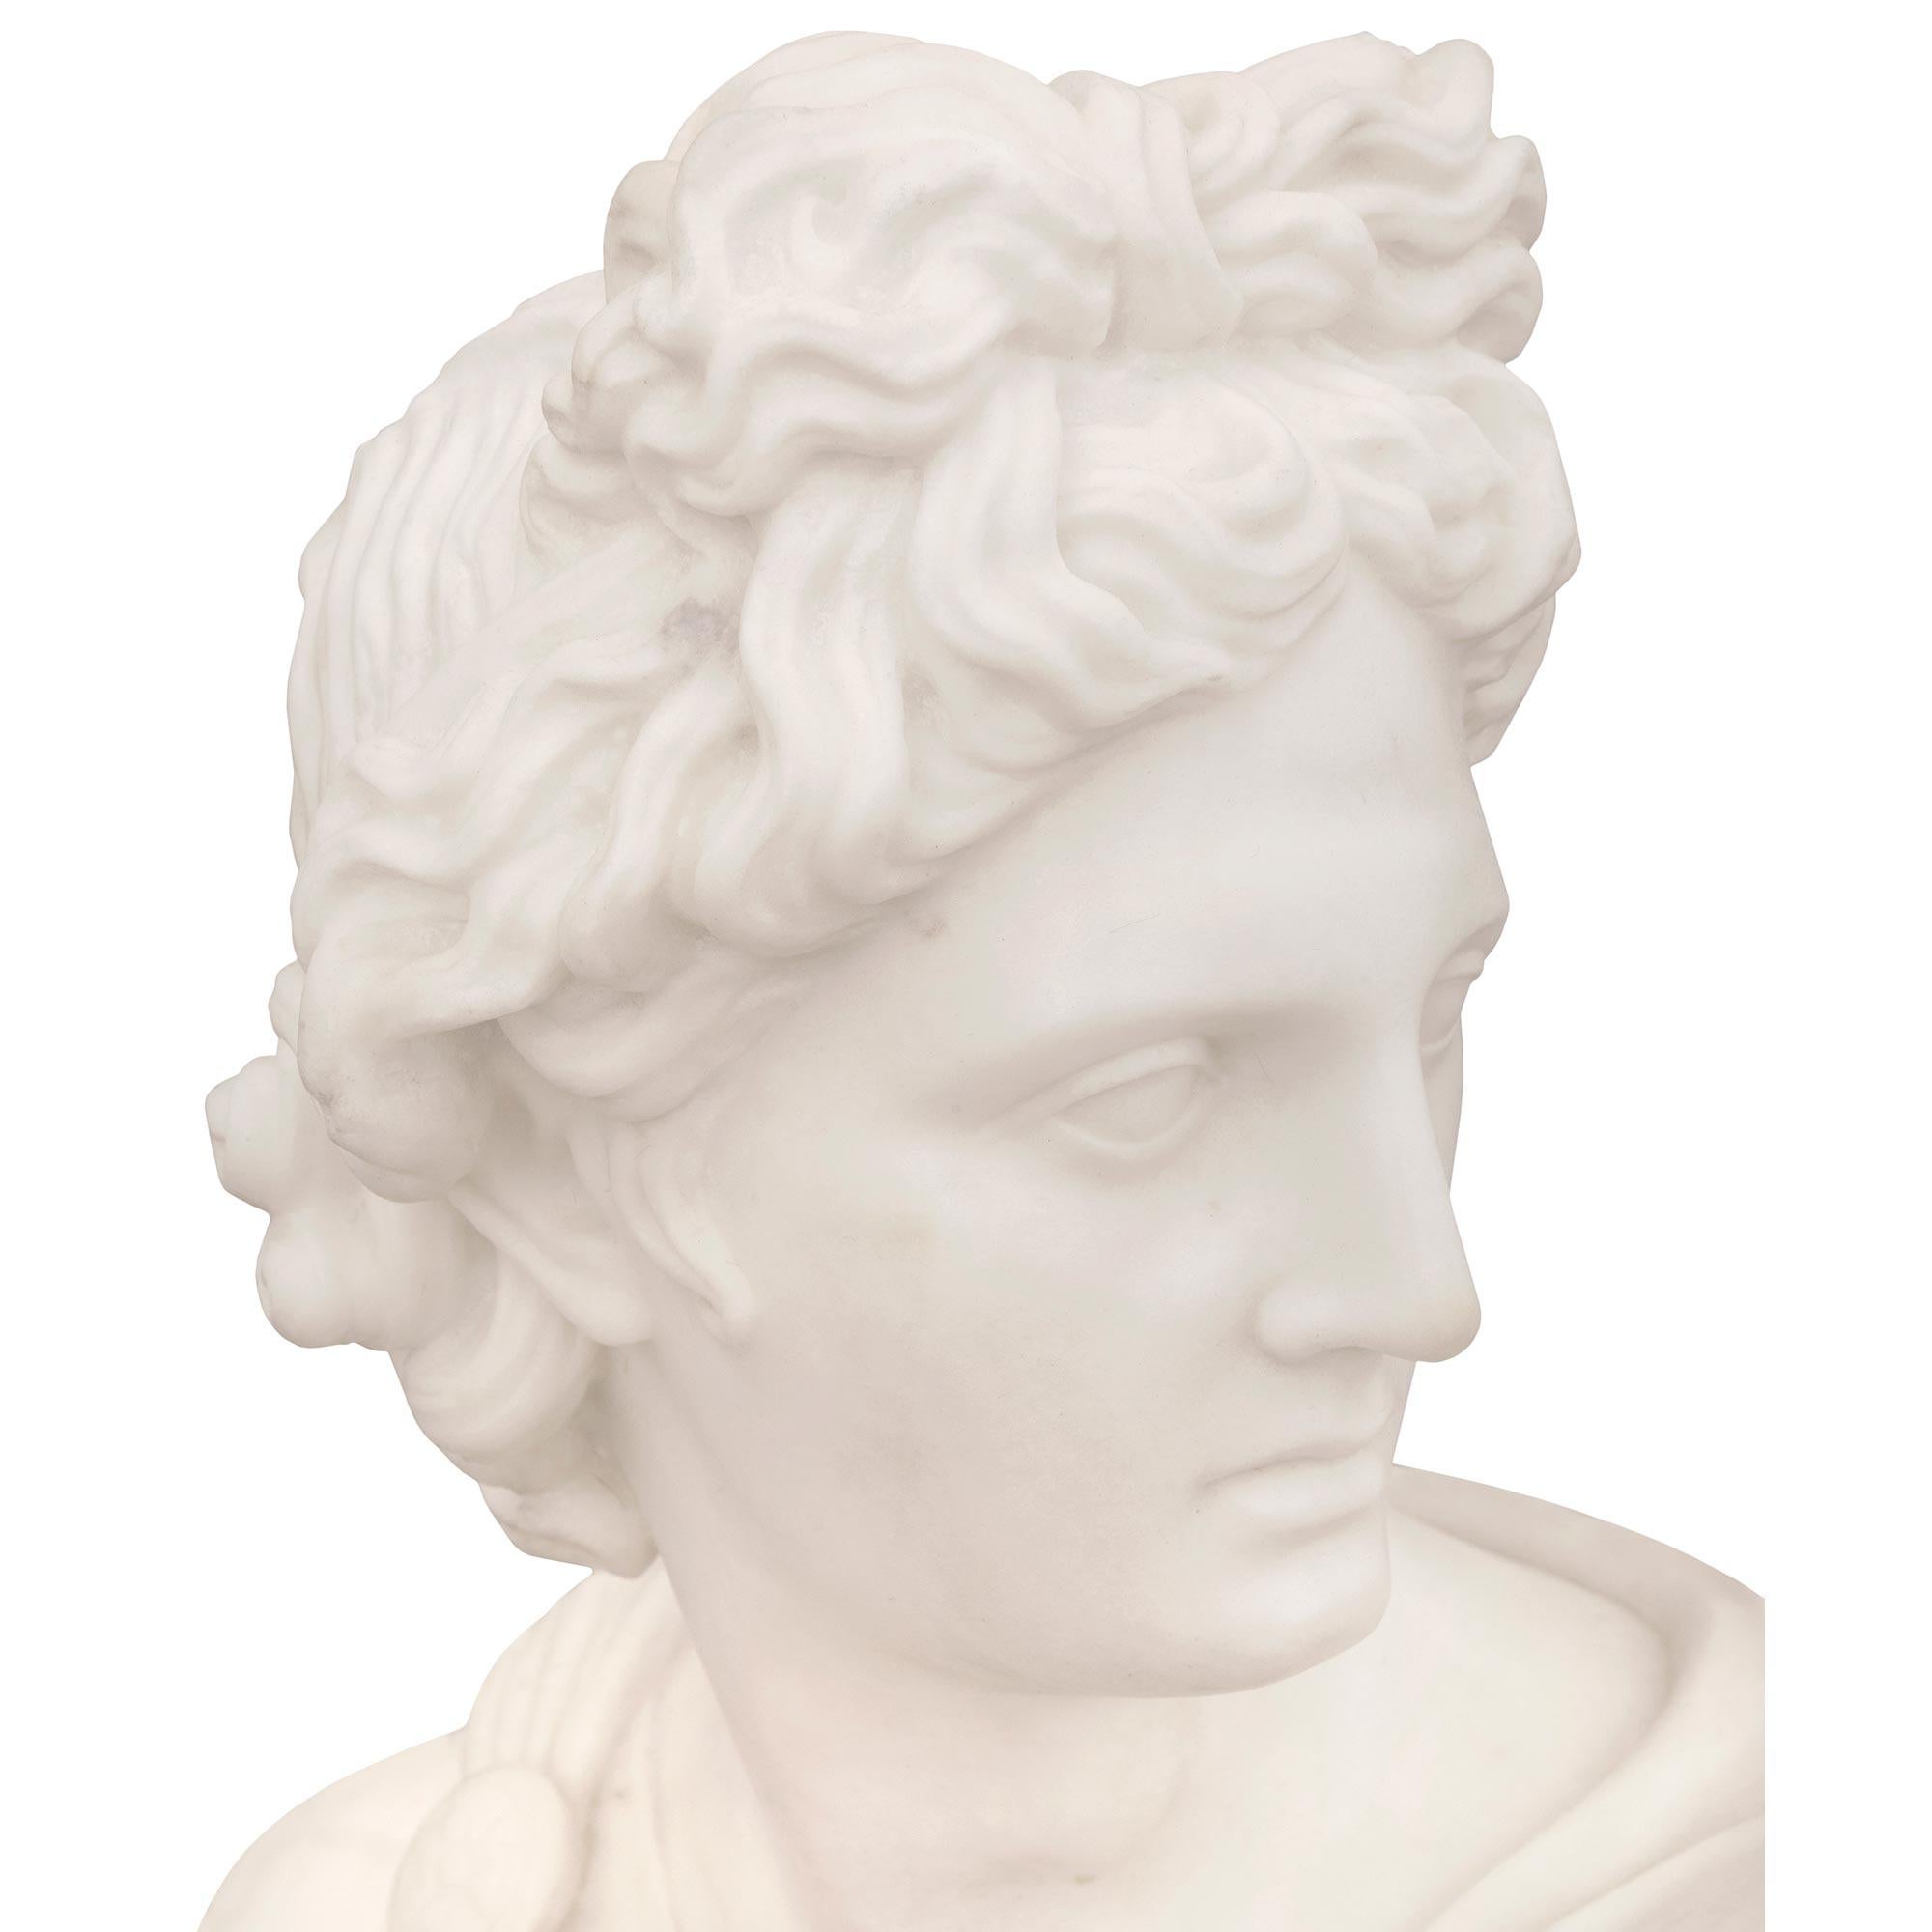 Italian 19th Century Neo-Classical St. Marble Bust of Apollo Belvedere In Good Condition For Sale In West Palm Beach, FL